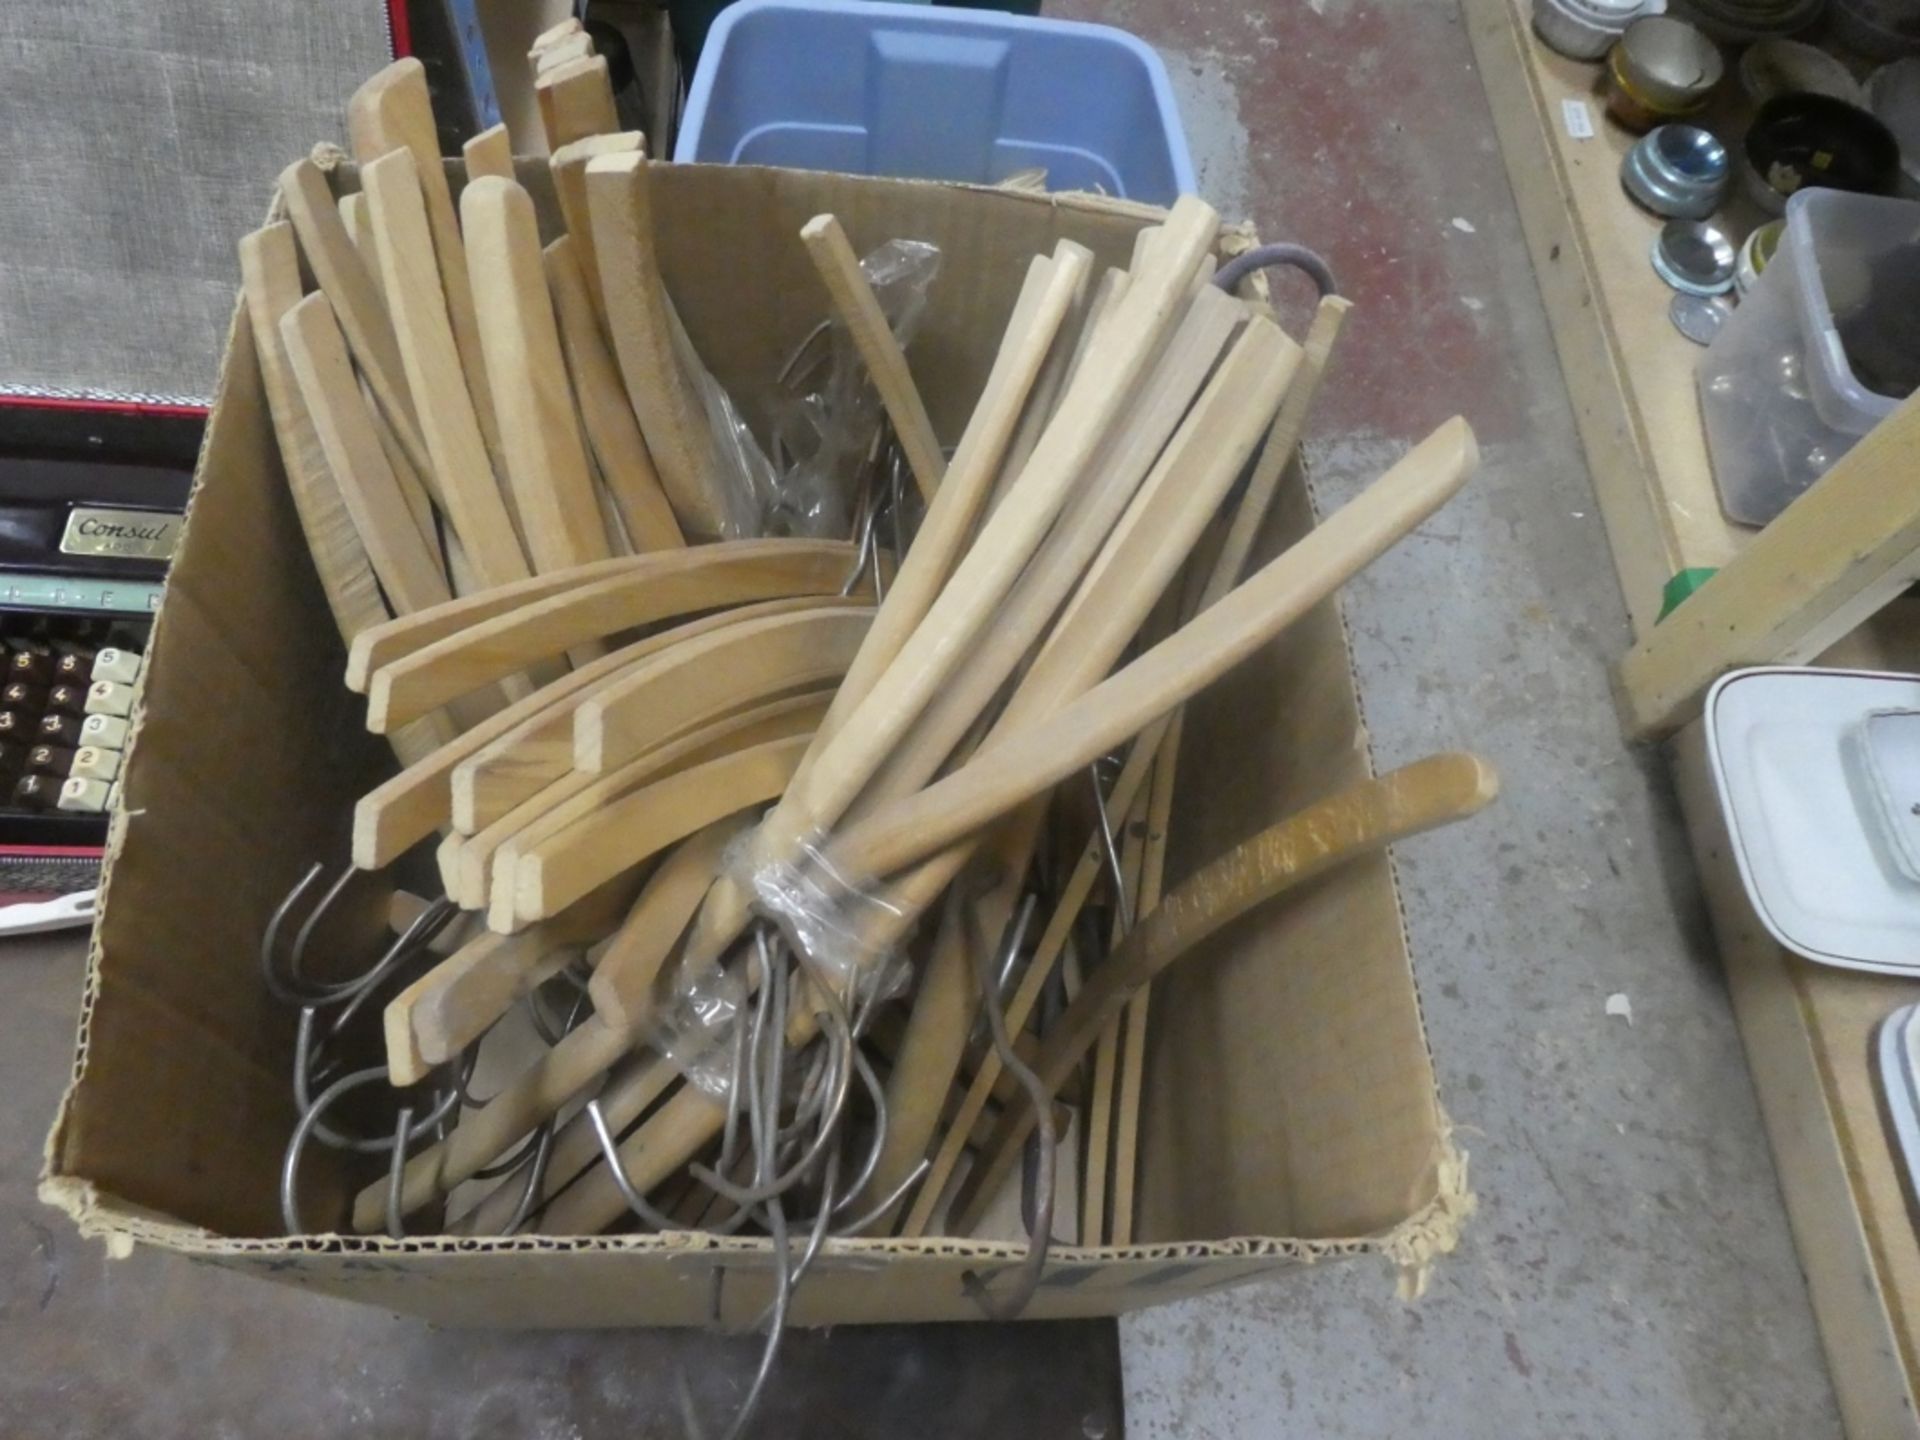 BOX OF VINTAGE CLOTHES HANGERS & TUB OF LAMP SHADES